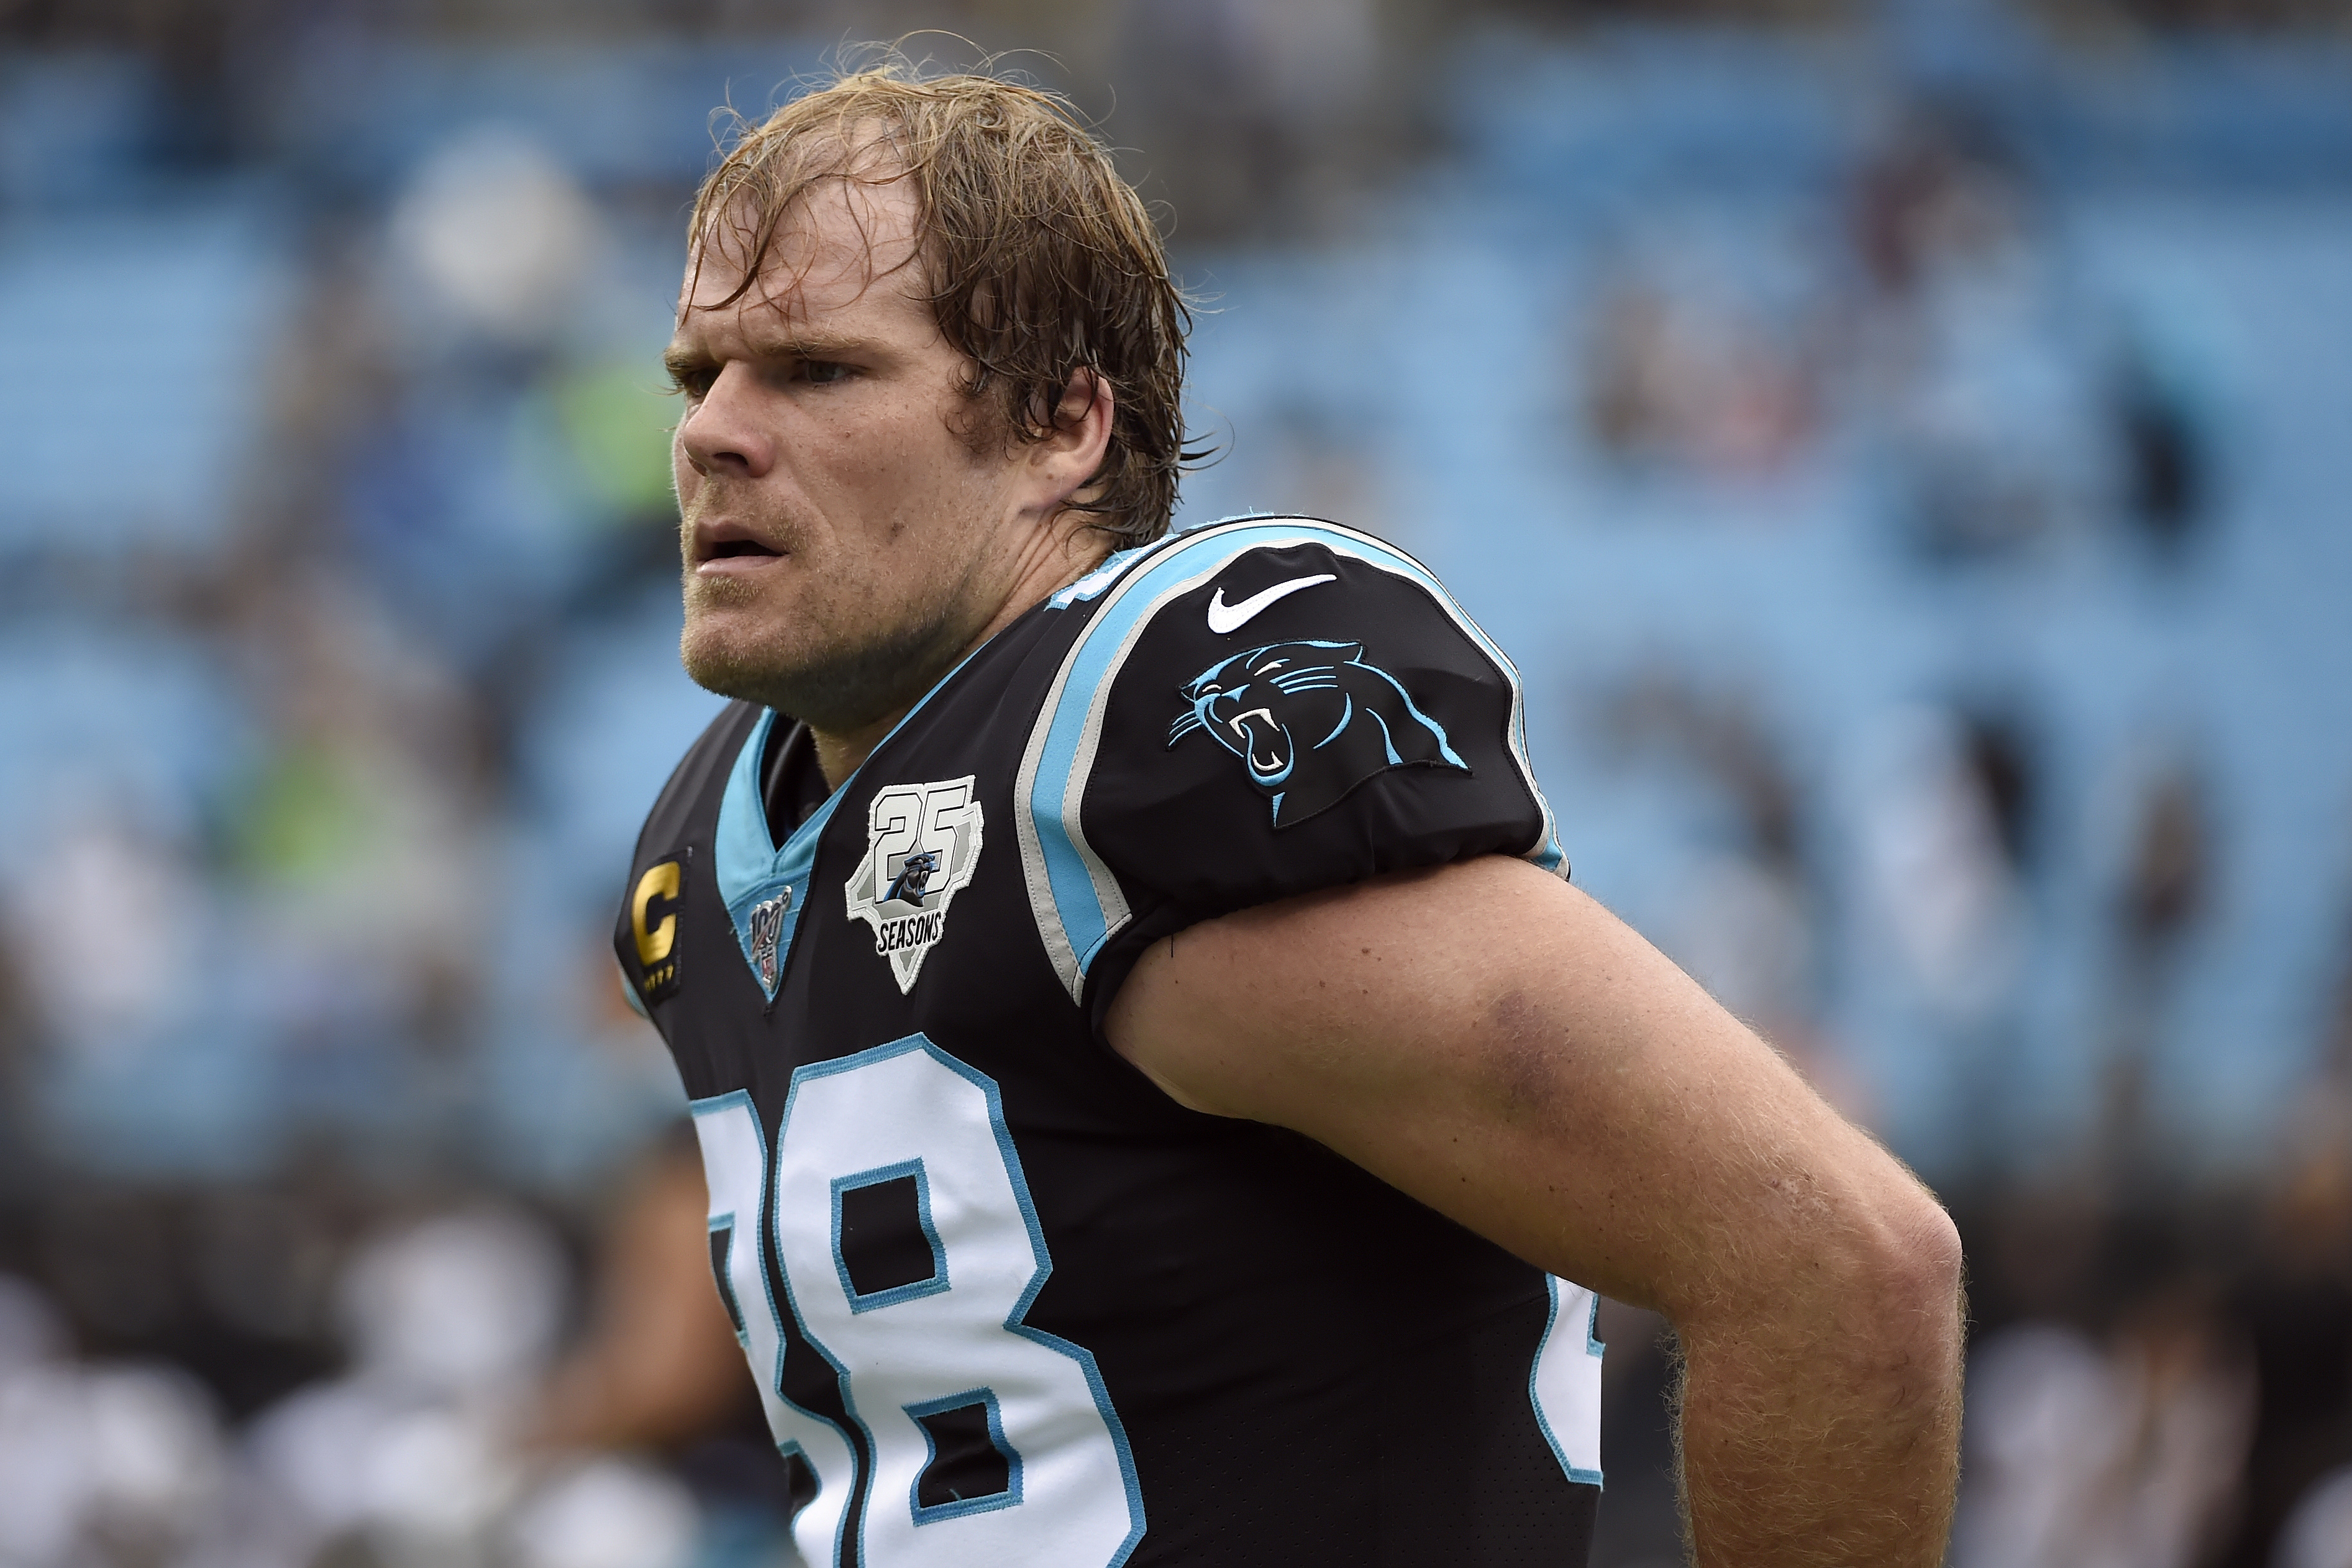 Son of N.J. native and ex-NFL star Greg Olsen faces life ...